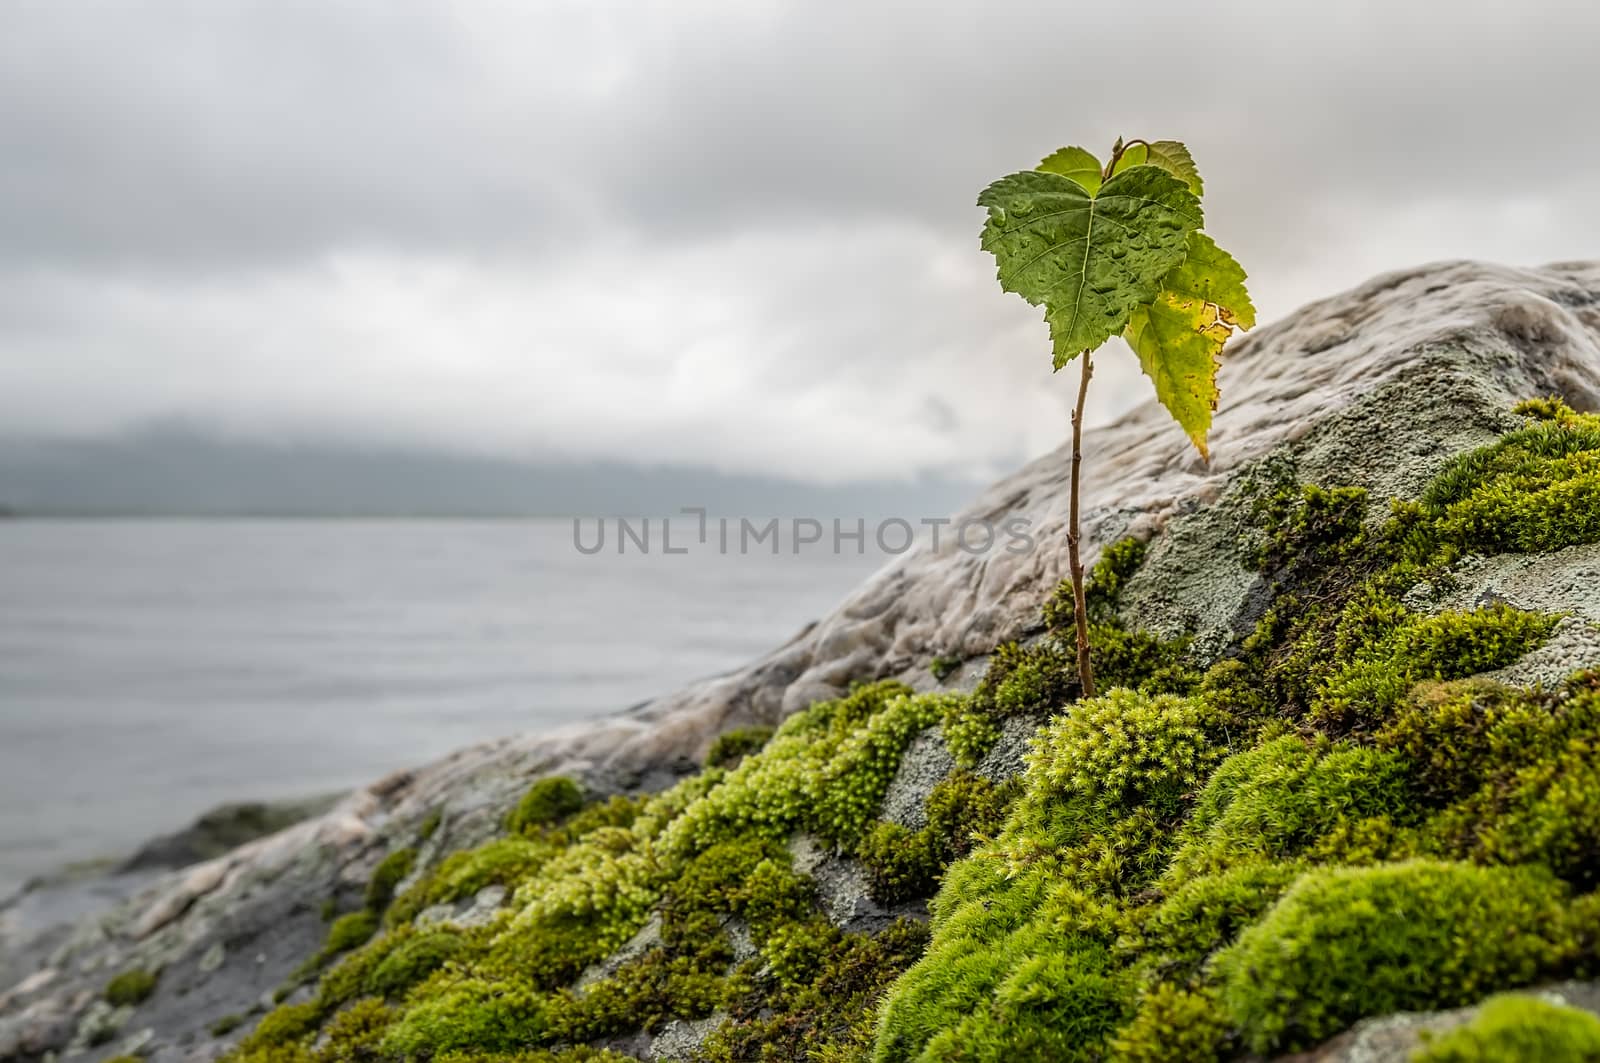 sprouted on the stone with the moss a sprig of birch by jk3030